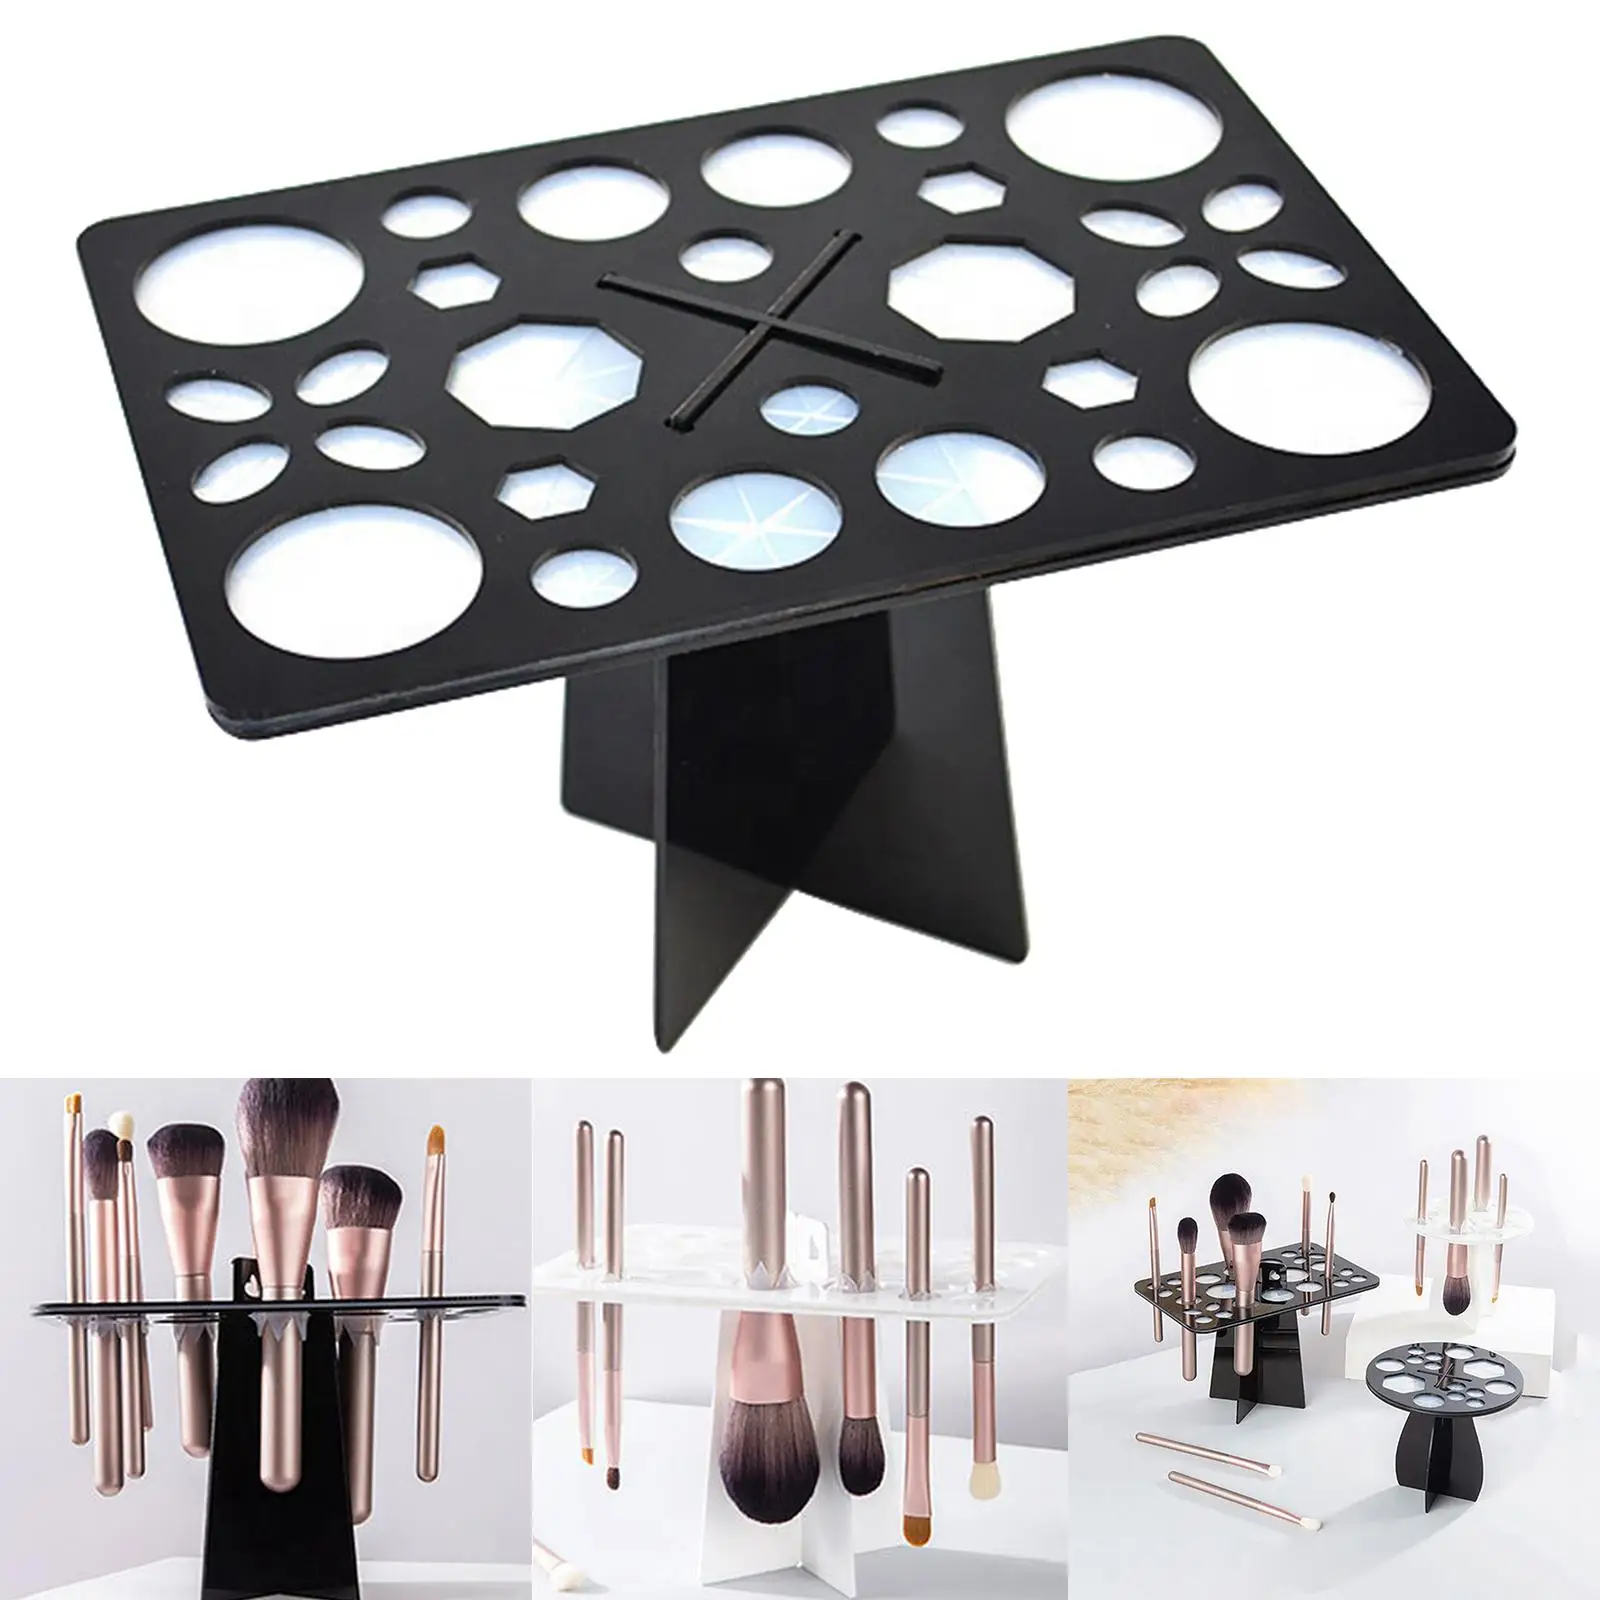 Acrylic Makeup Brushes Drying Rack, Removable Tree Tray Wear Resistant Accessories